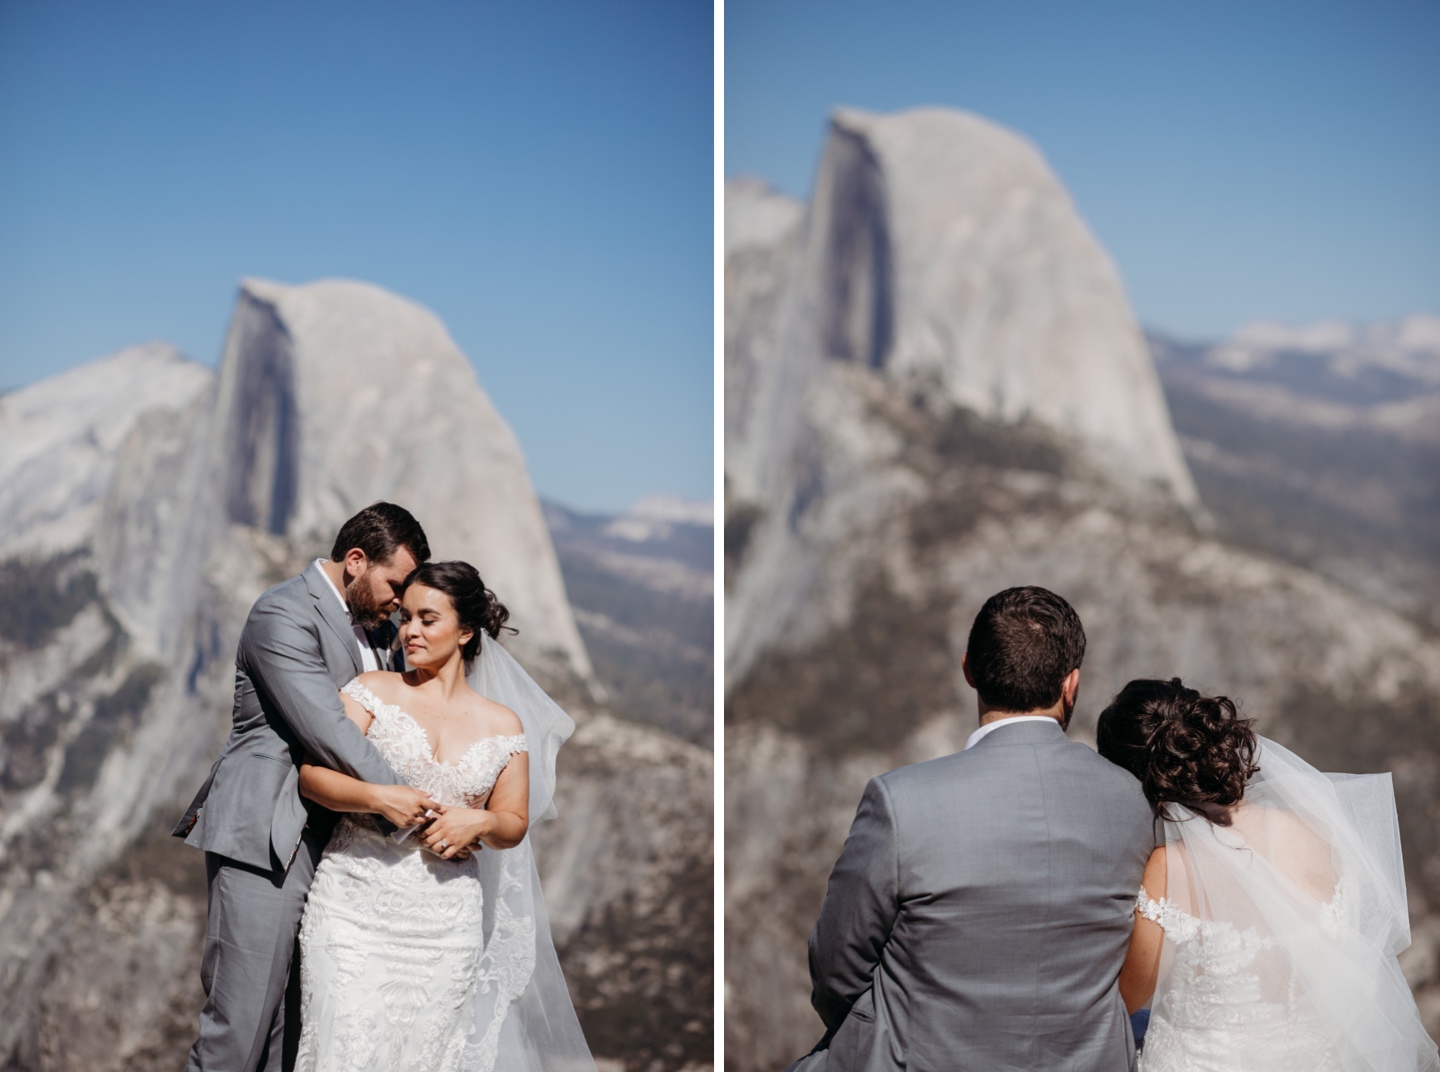 Bride and groom embrace after their Glacier Point wedding with Half Dome in the distance of Yosemite National Park.